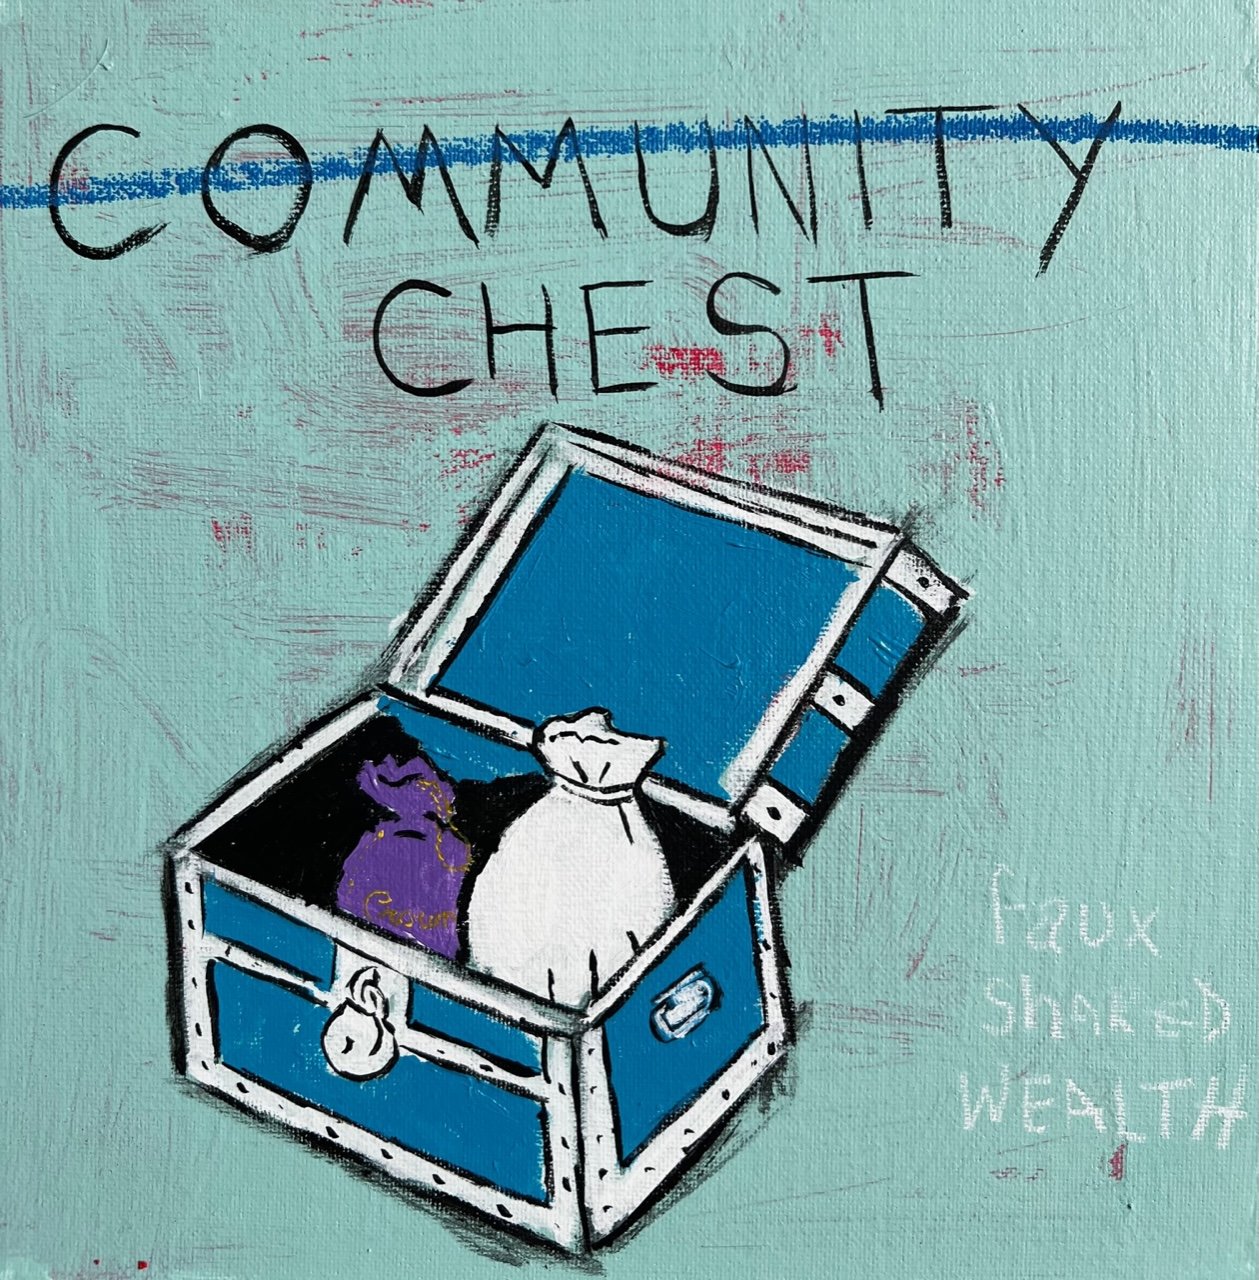 Comminuty Chest